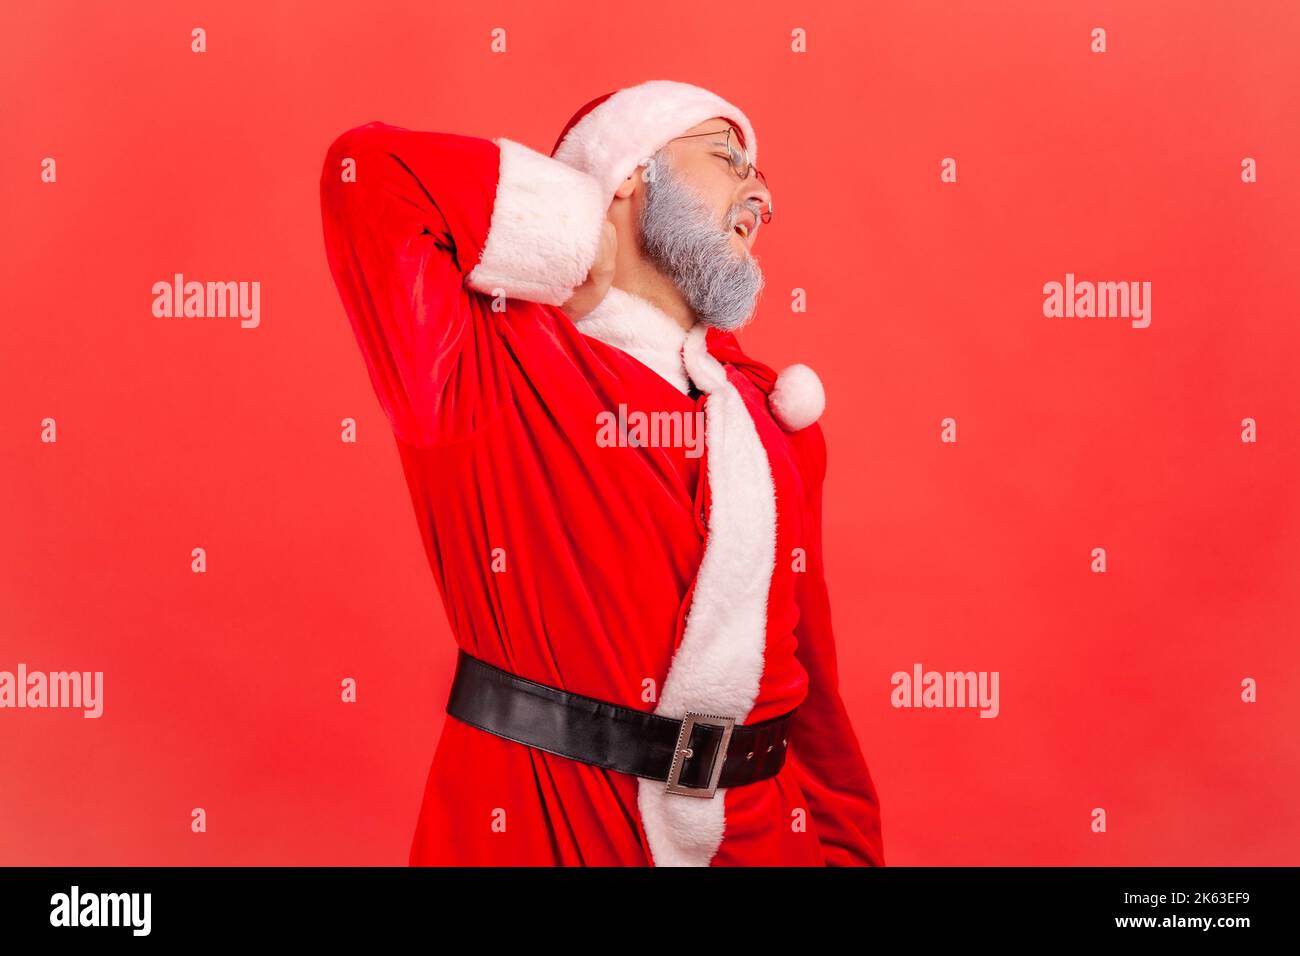 Shoulders and neck pain. Portrait of elderly man with gray beard wearing santa claus costume massaging neck to relieve pain, muscle strain in back. Indoor studio shot isolated on red background. Stock Photo